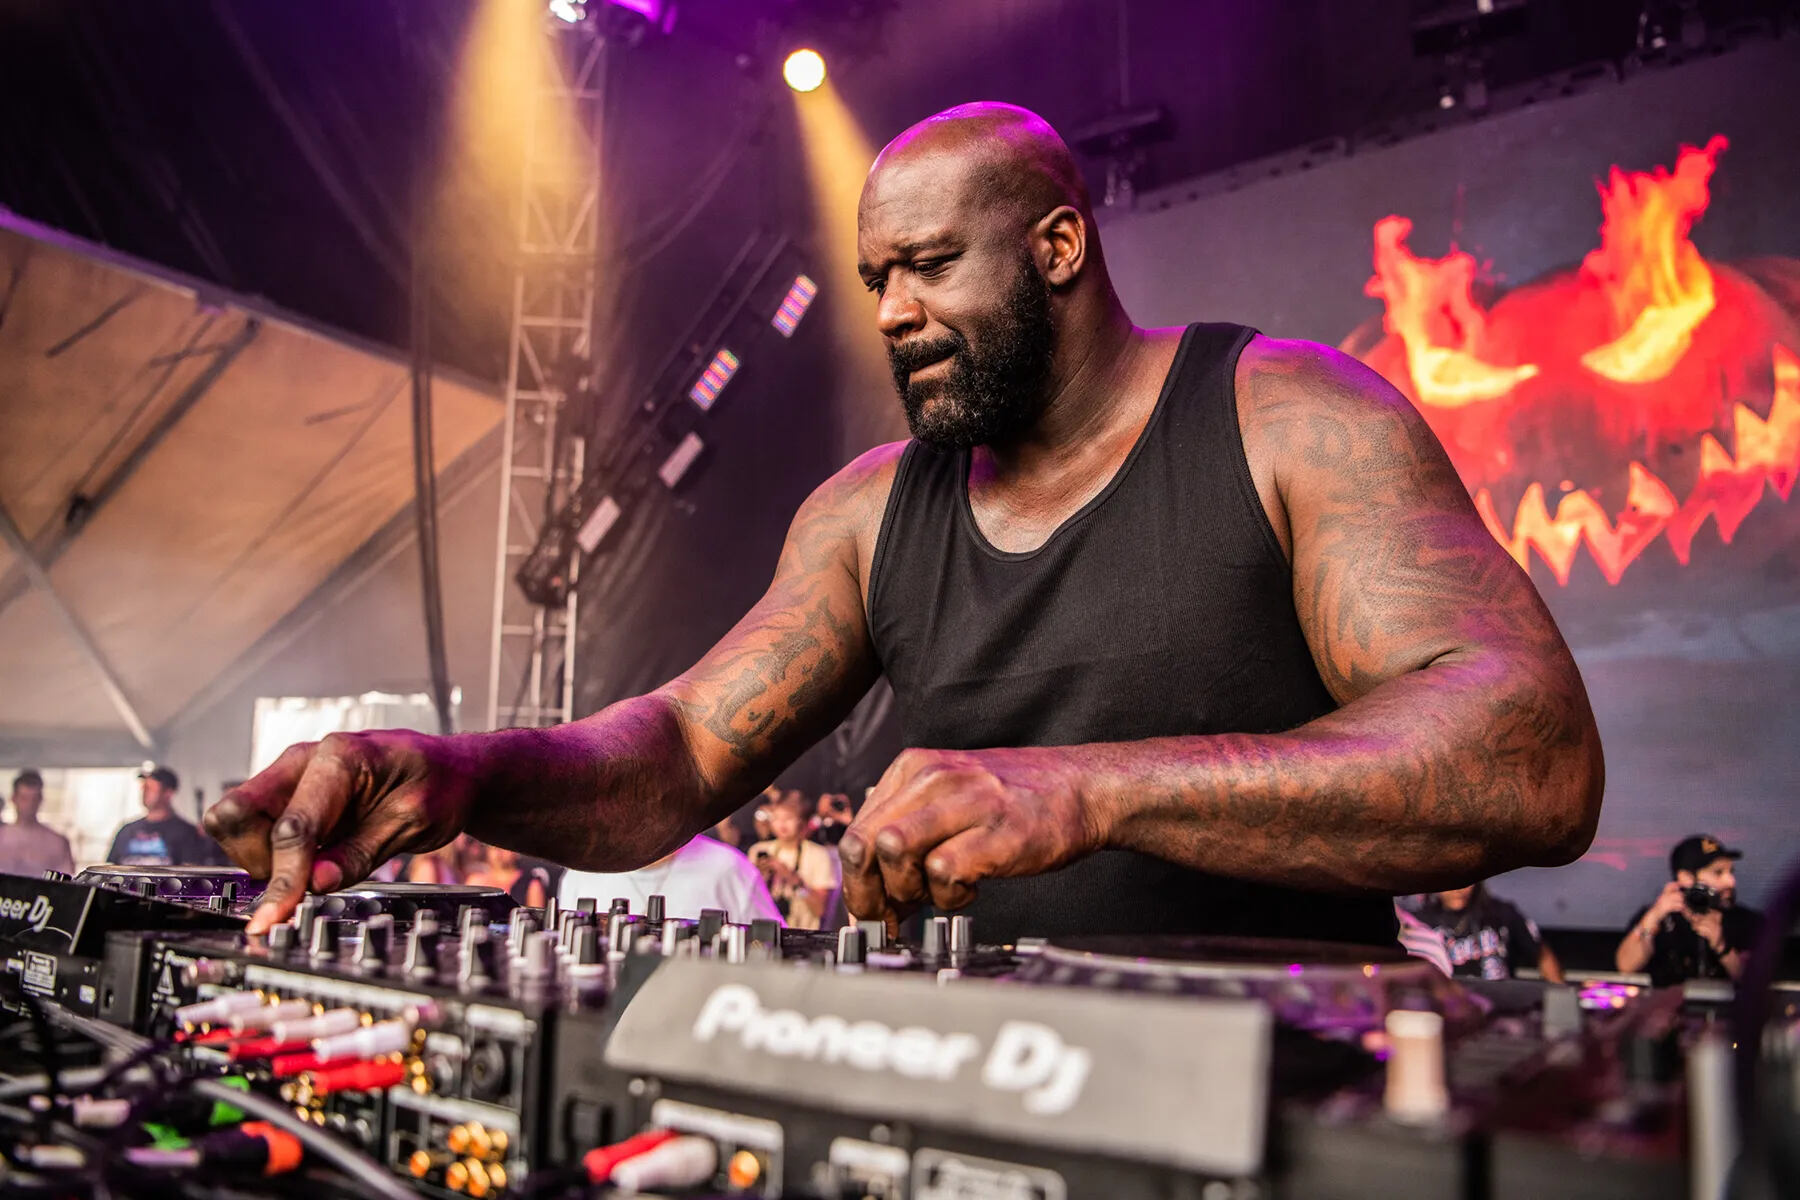 What Kind Of Music Does Shaq DJ?